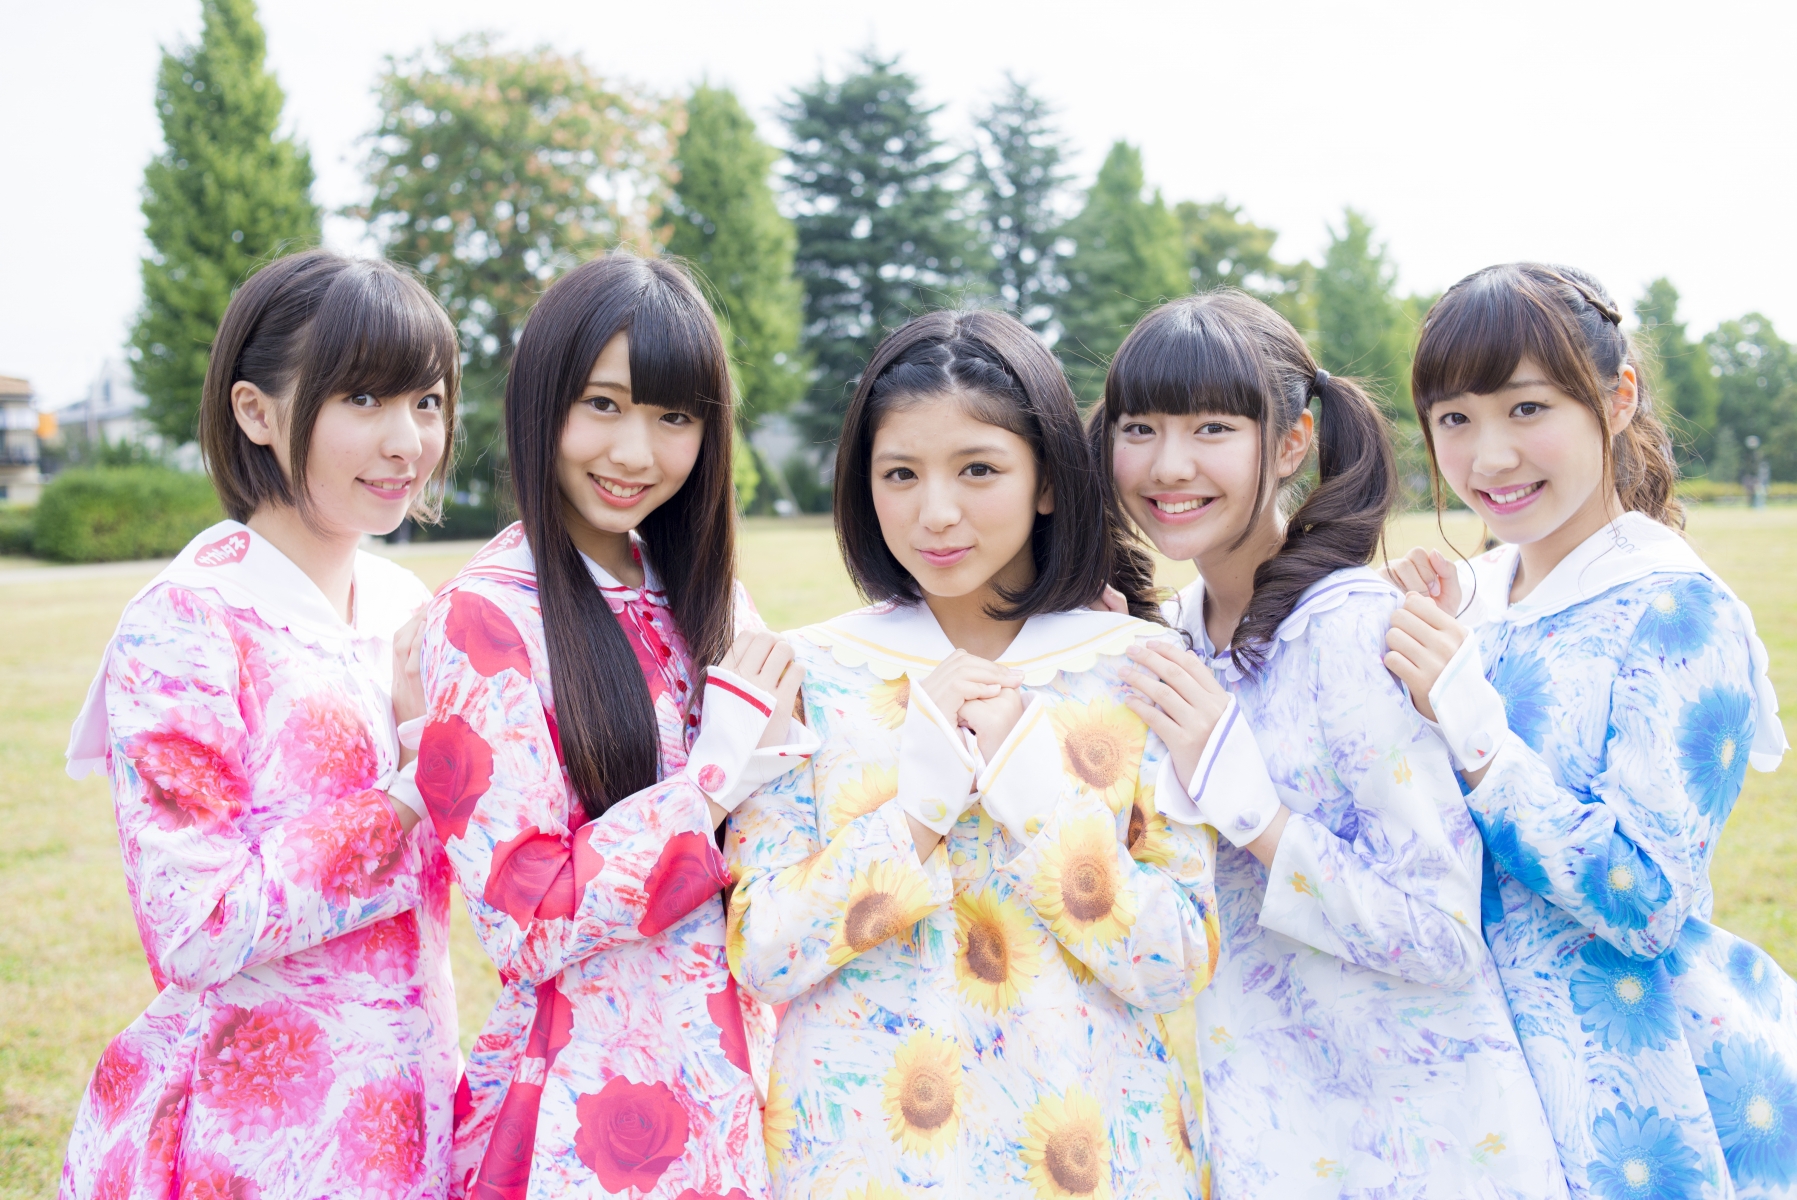 Girls and Flowers are the best combination made in heaven! Check Out the New MV from hanarichu!